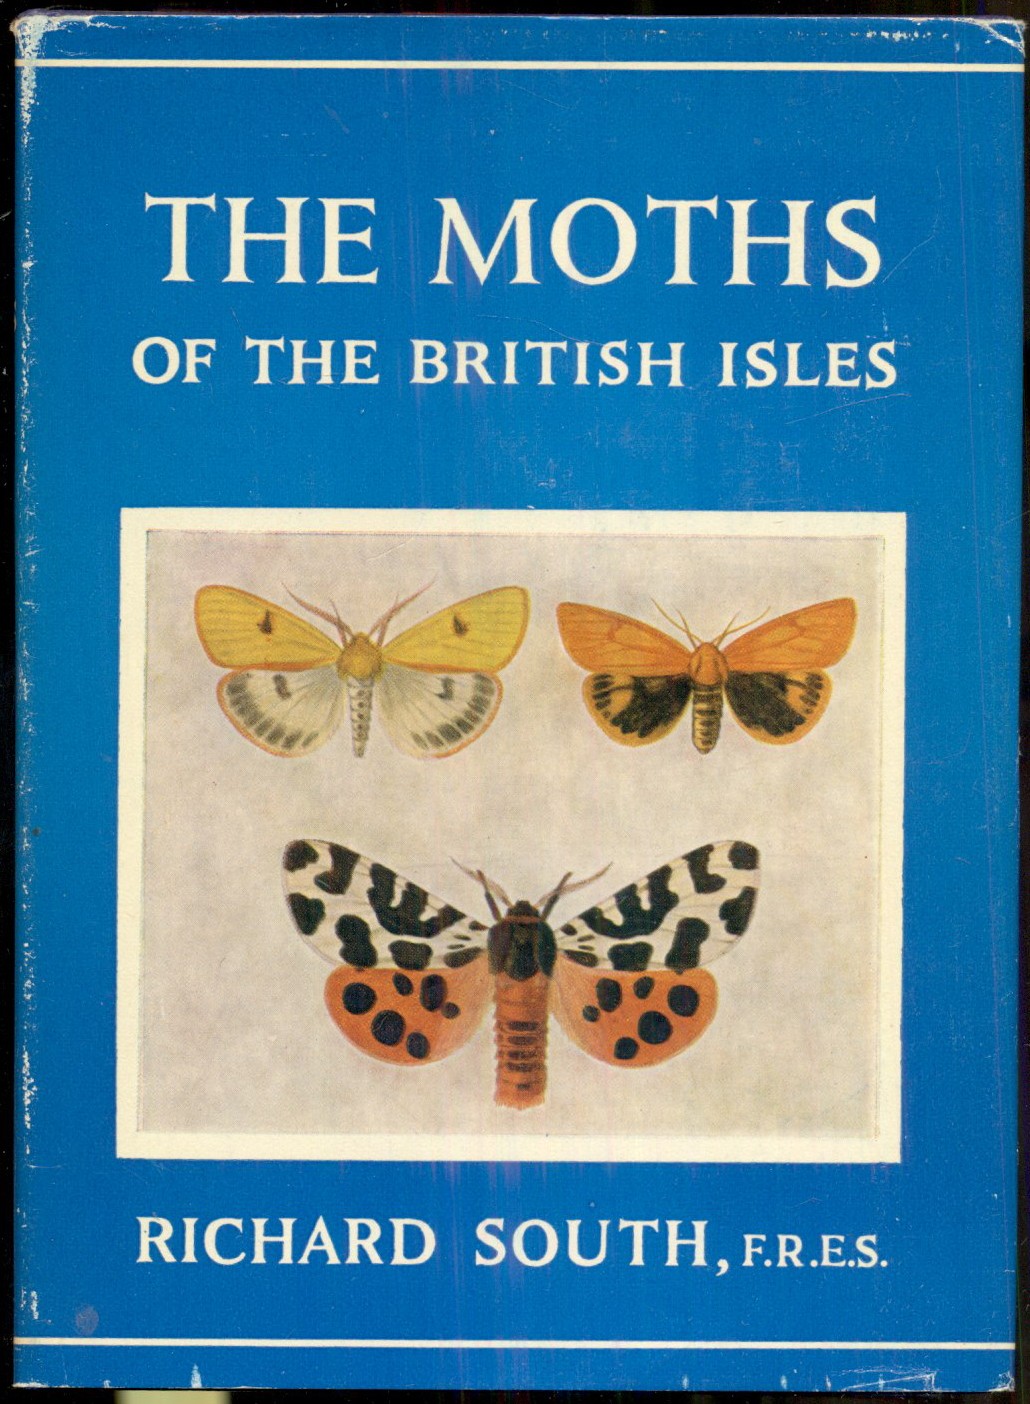 The Moths of the British Isles: Edited and Revised by H. M. Edelsten..., D. S. Fletcher and R. J. Collins. Second Series. Comprising the Families Lasiocampidae, Arctiidae, Geometridae, Cossidae, Limacodidae, Zygaenidae, Sesiidae, and Hepialidae. With coloured figures and drawings of early stages - South, Richard